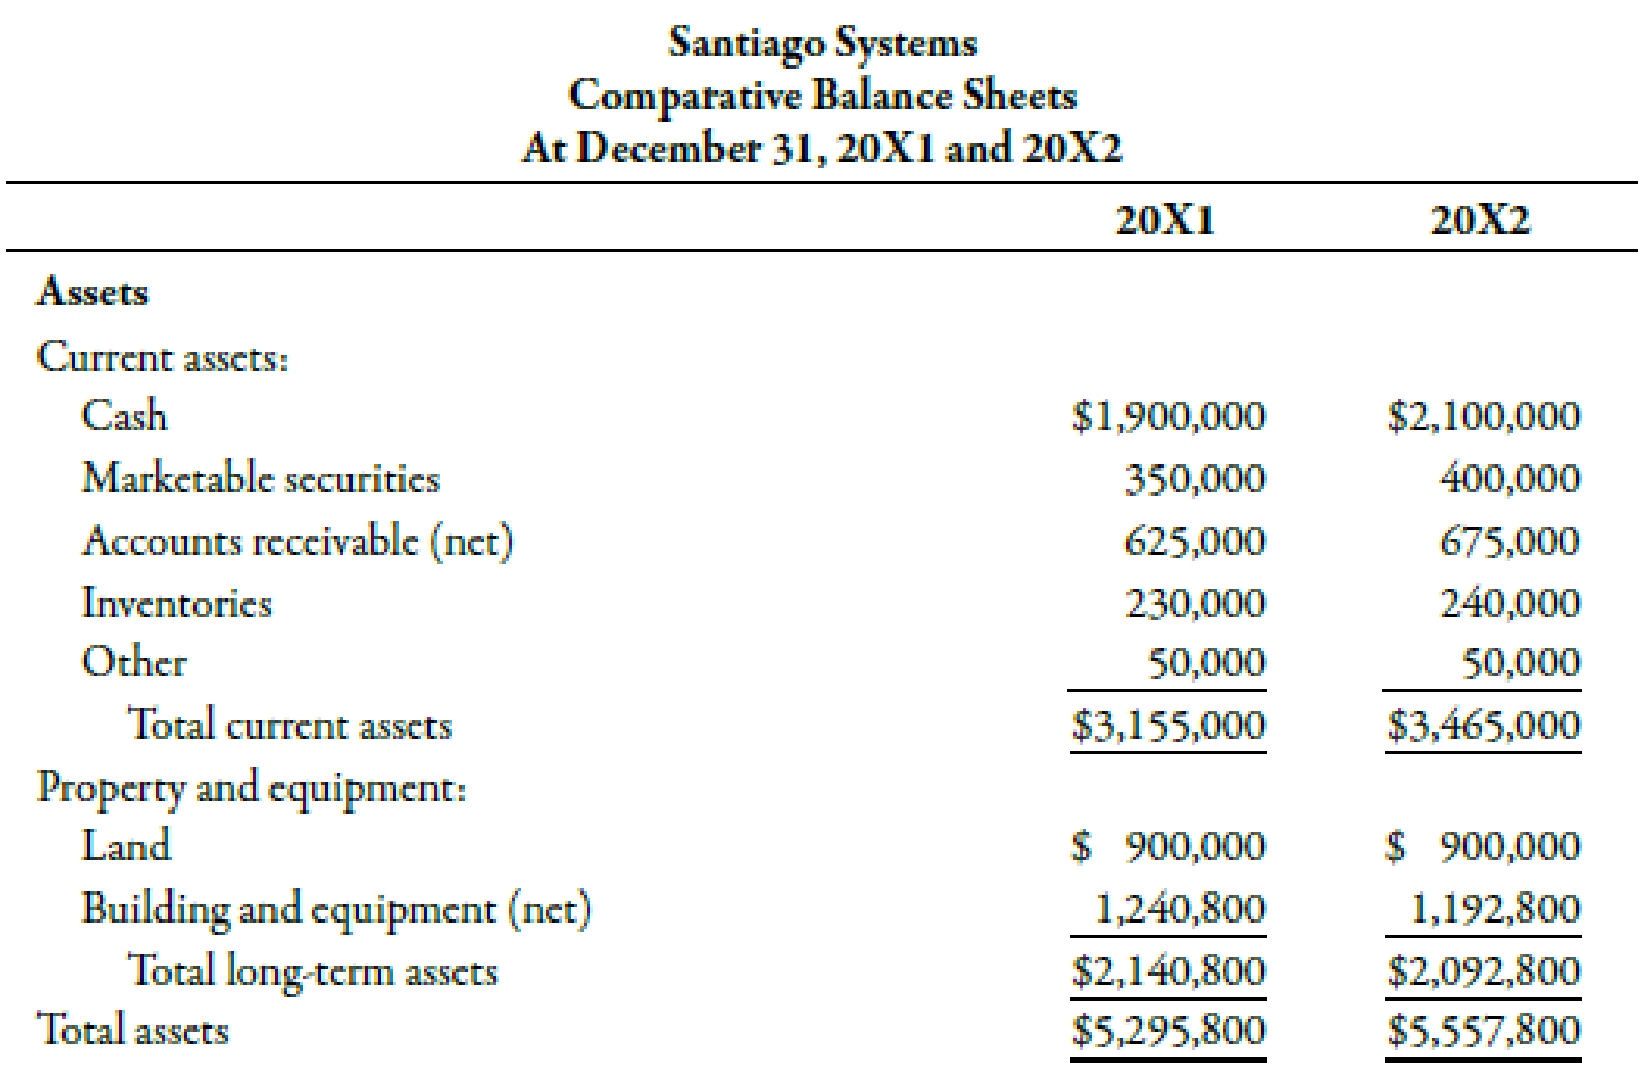 The income statement, statement of retained earnings, and balance sheet for Santiago Systems are ...